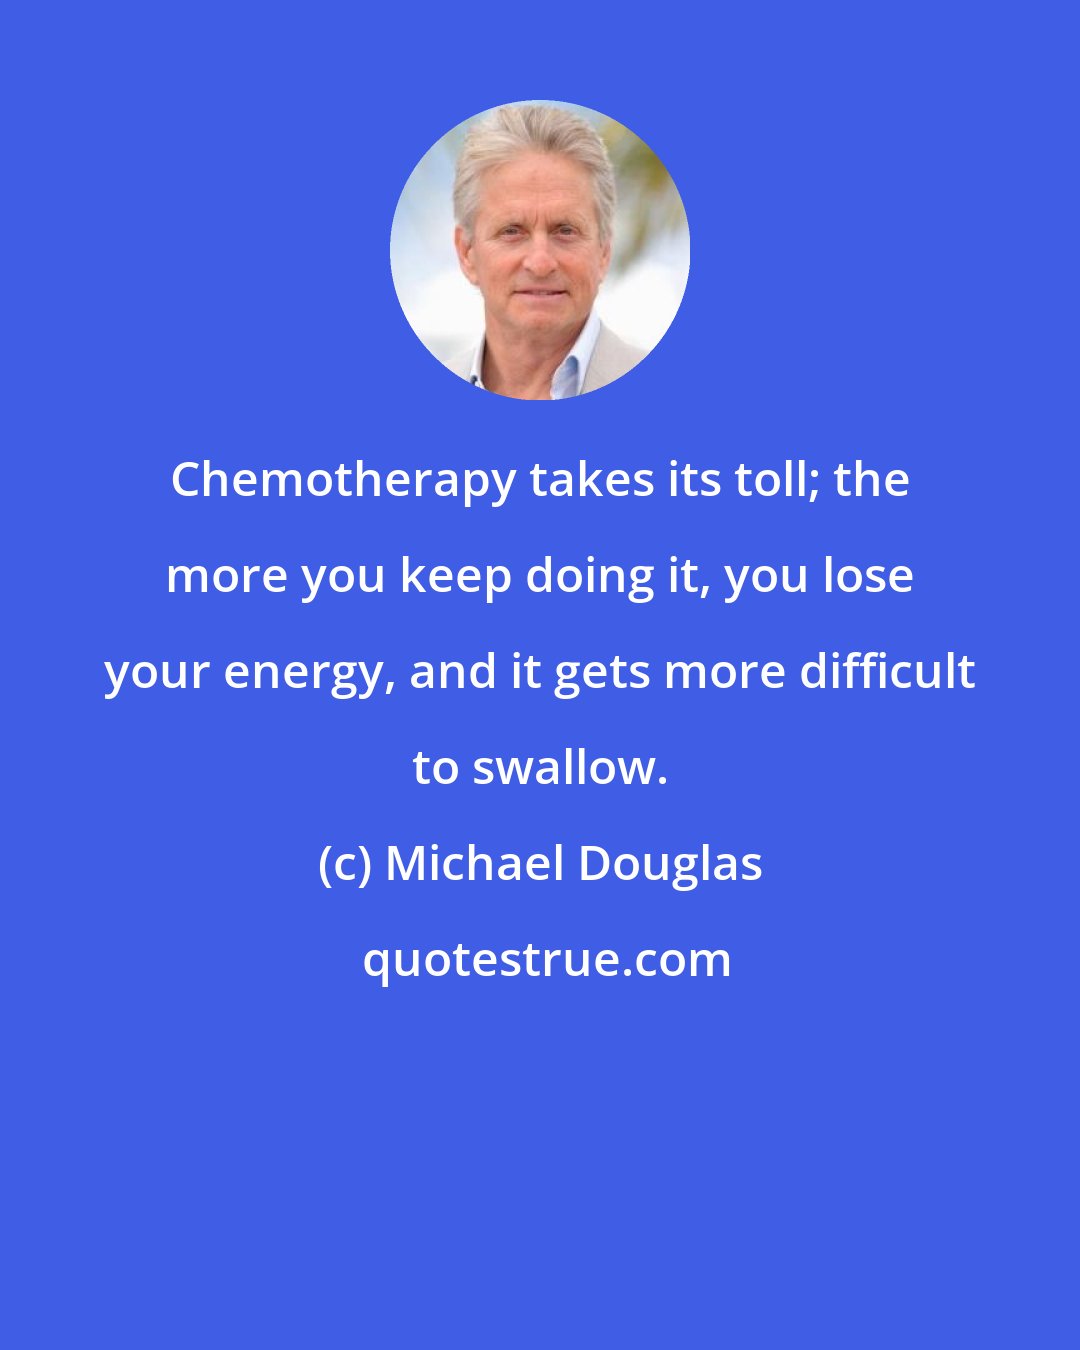 Michael Douglas: Chemotherapy takes its toll; the more you keep doing it, you lose your energy, and it gets more difficult to swallow.